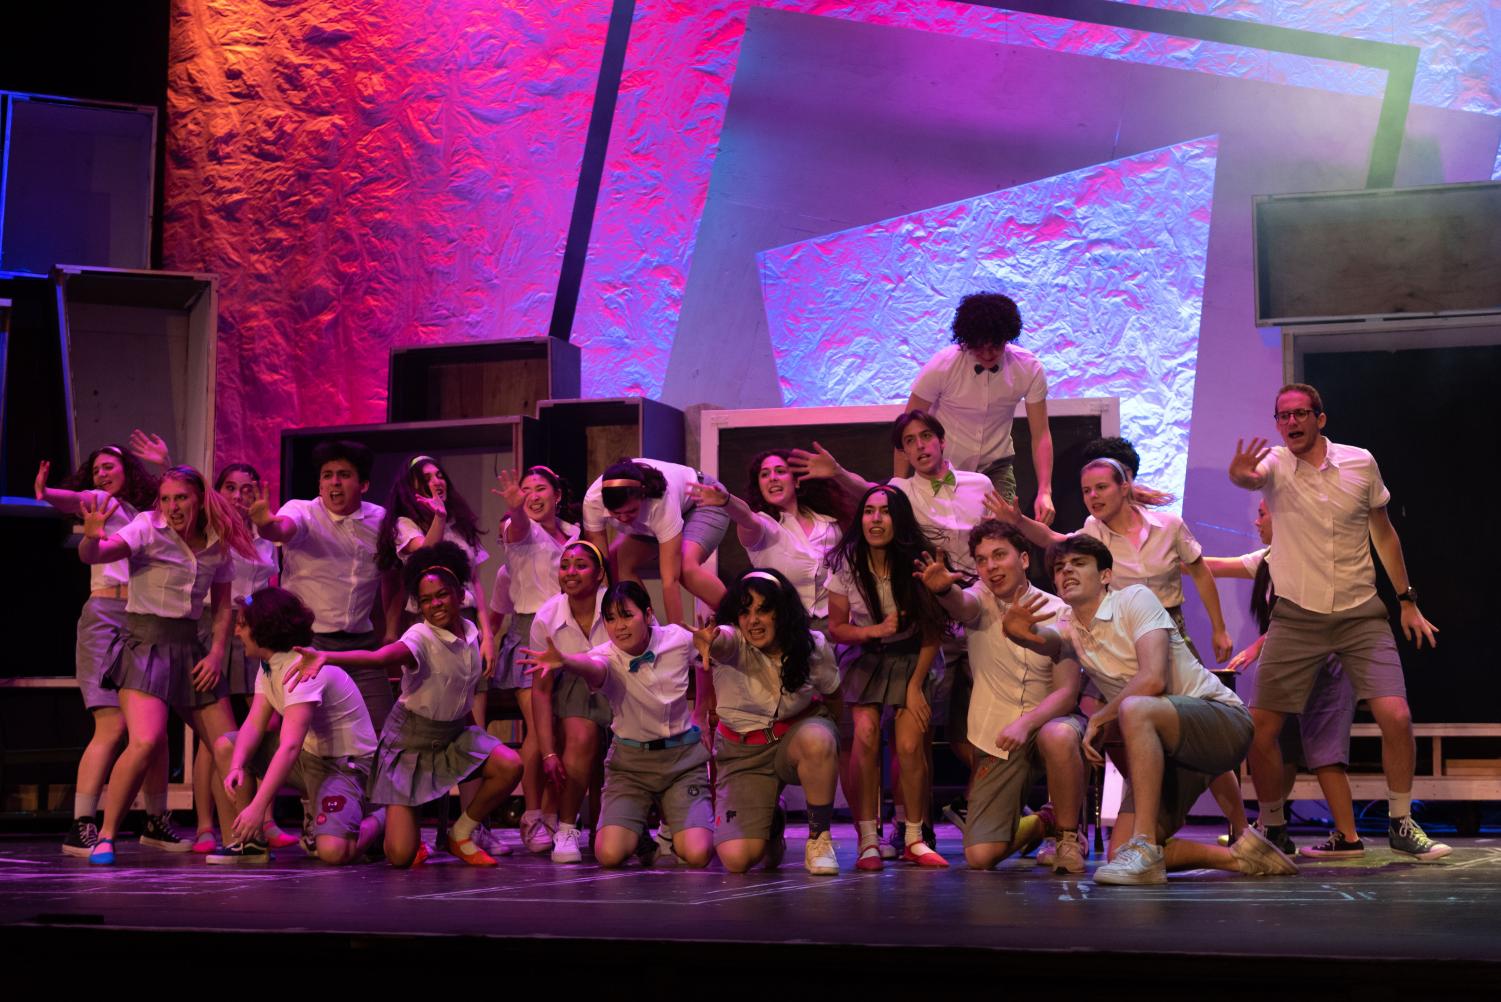 A+group+of+students+wearing+uniforms+dance+on+stage.